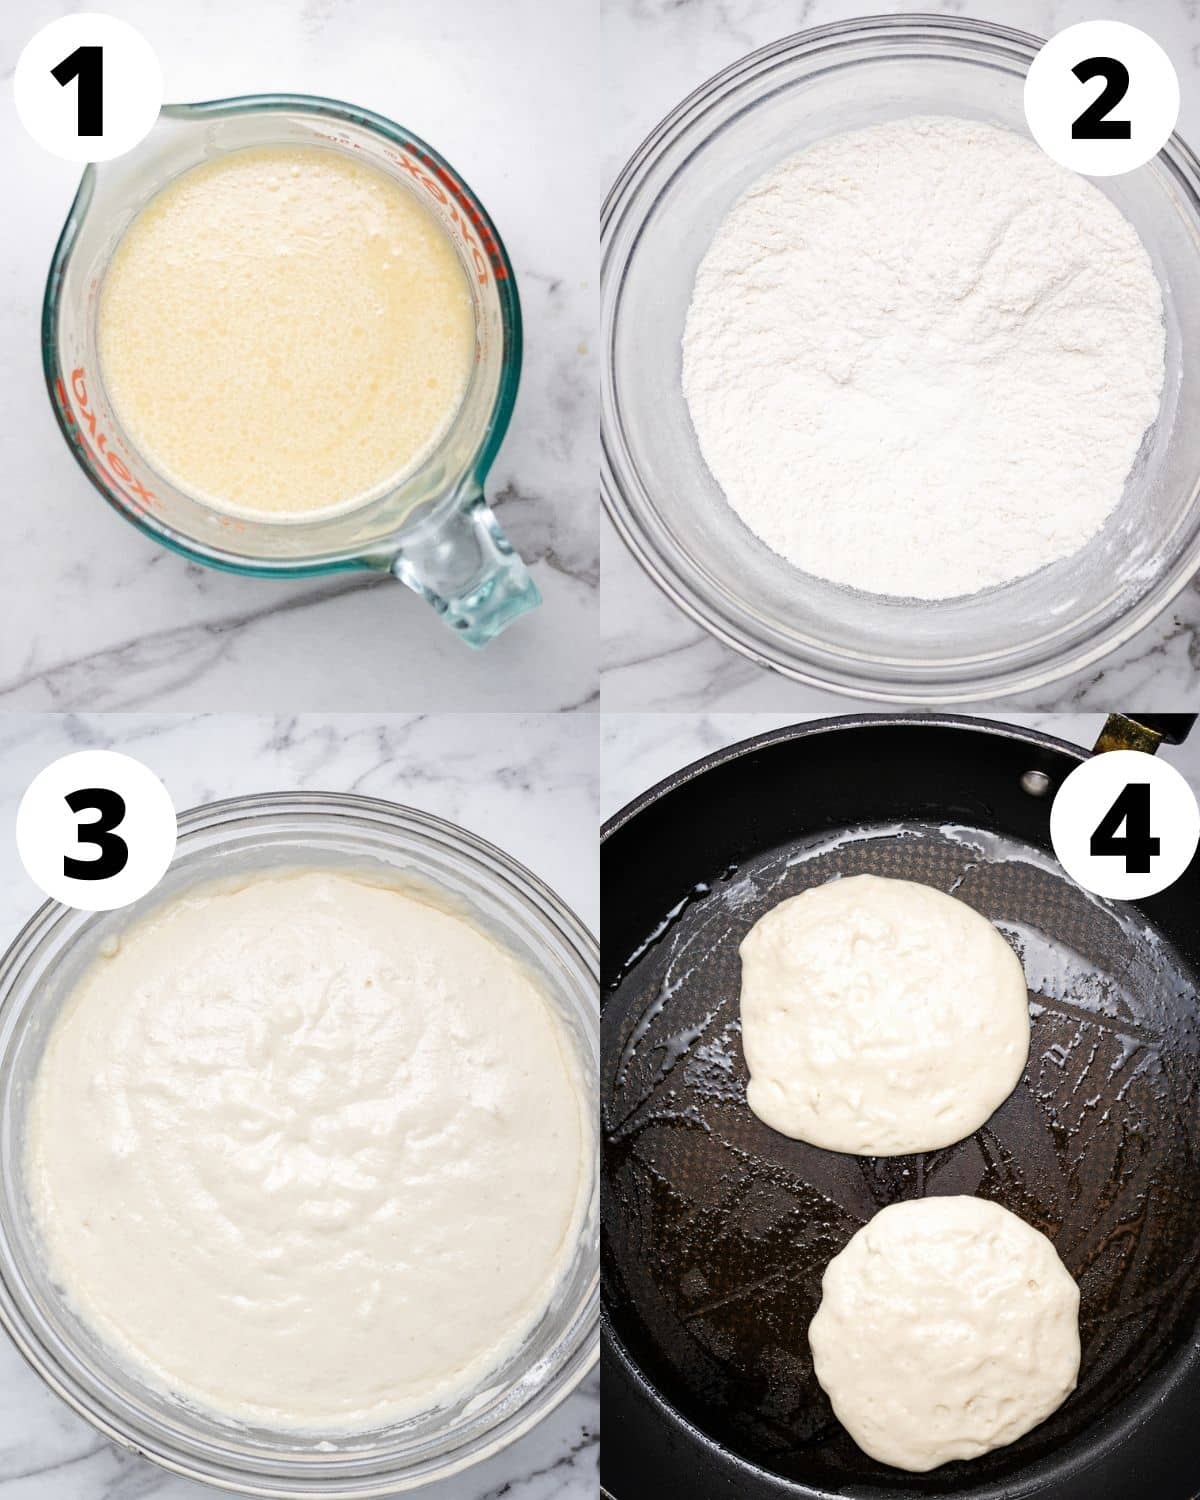 Oat milk pancake recipe step by step process picture in 4 different steps